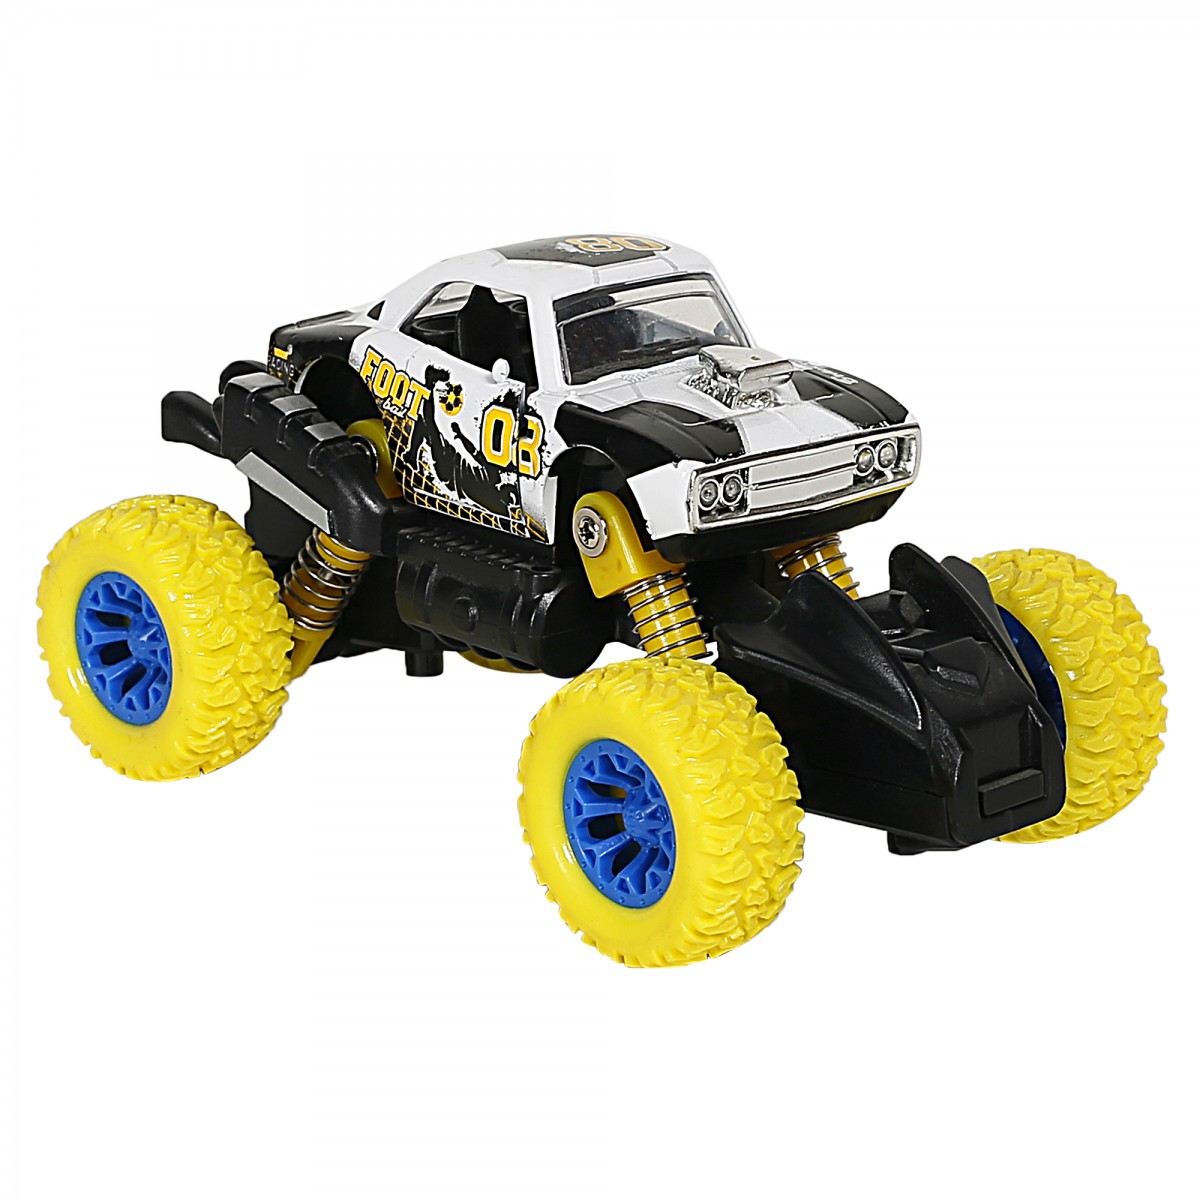 Ralleyz Pull Back Diecast Monster Car for Kids, Multicolour, 3Y+